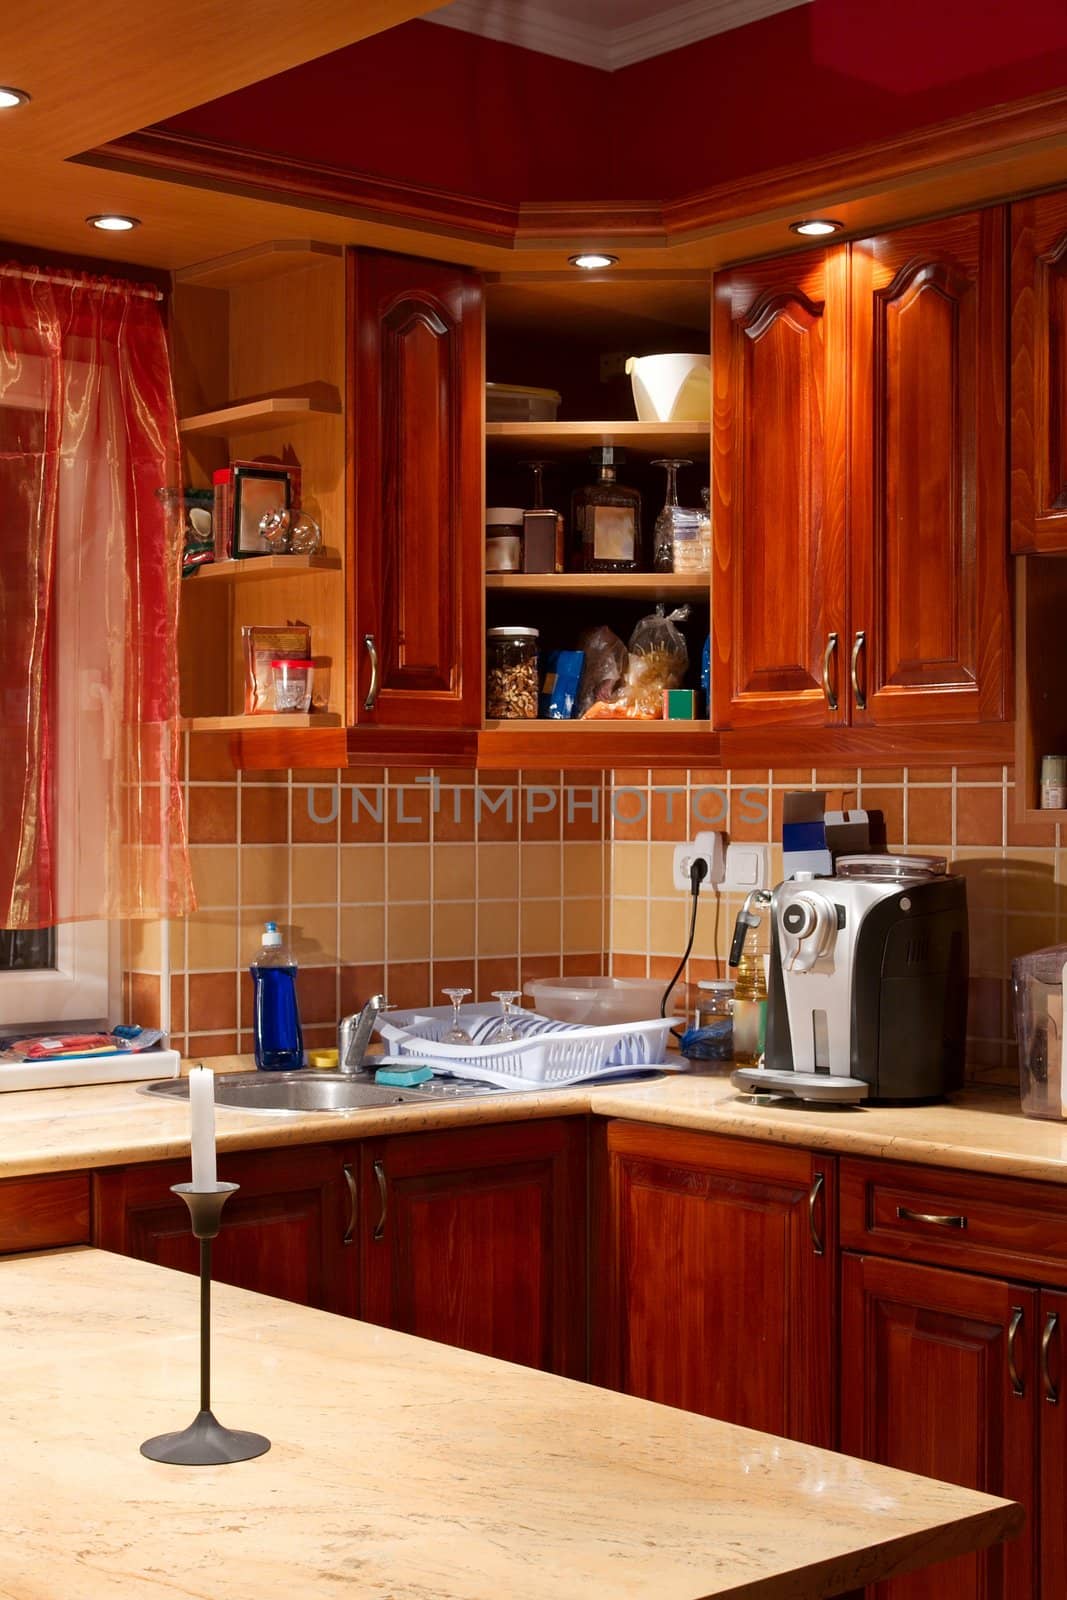 Interior shot of a modern, well equipped kitchen